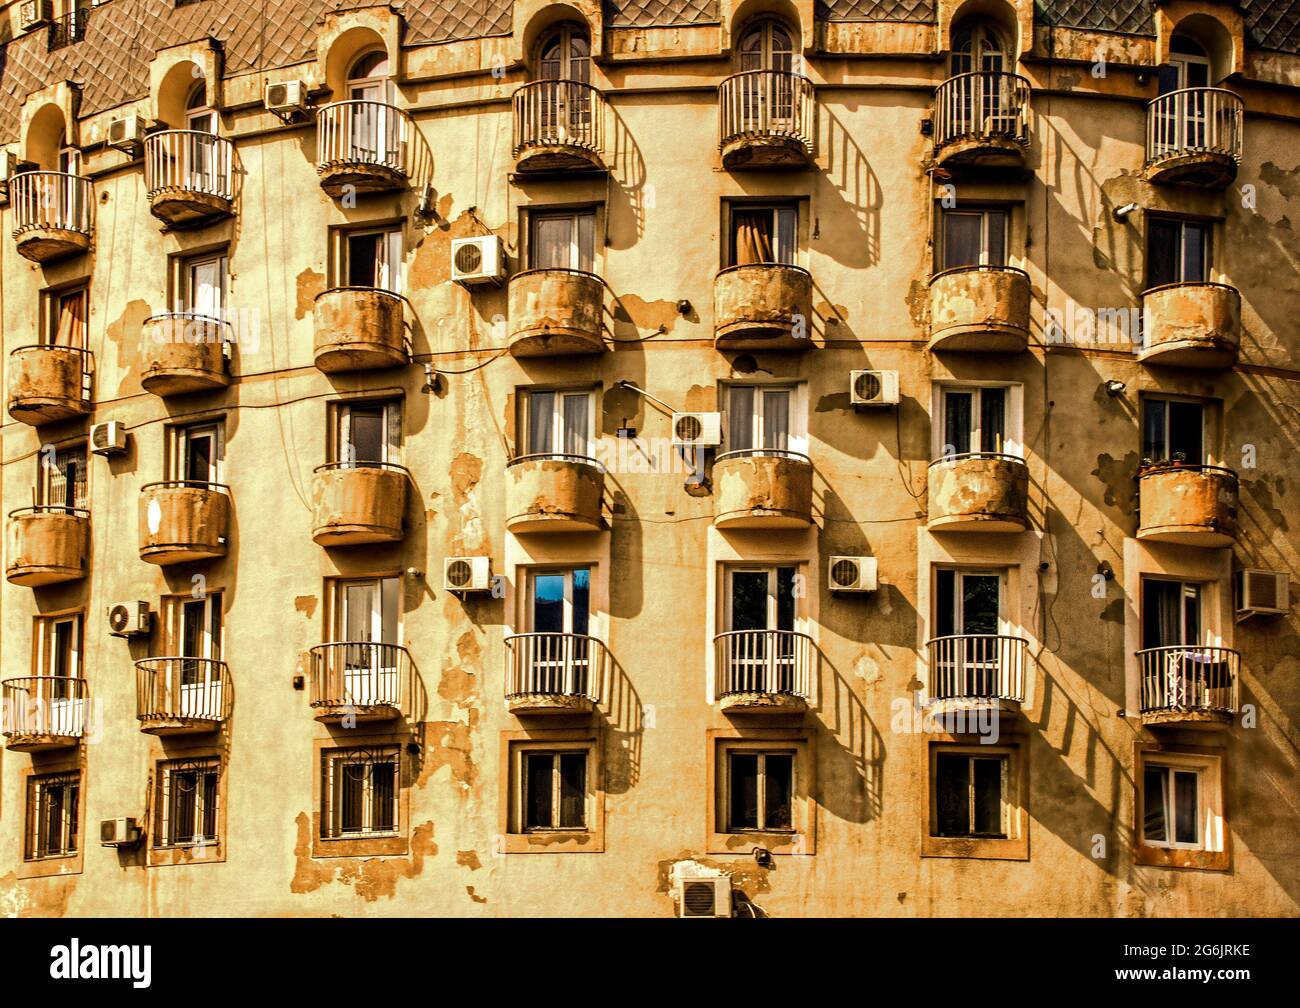 Rounded balconies on rounded building in Tbilisi Georgia Eurasia with peeling plaster and air conditoners making a textured pattern. Stock Photo